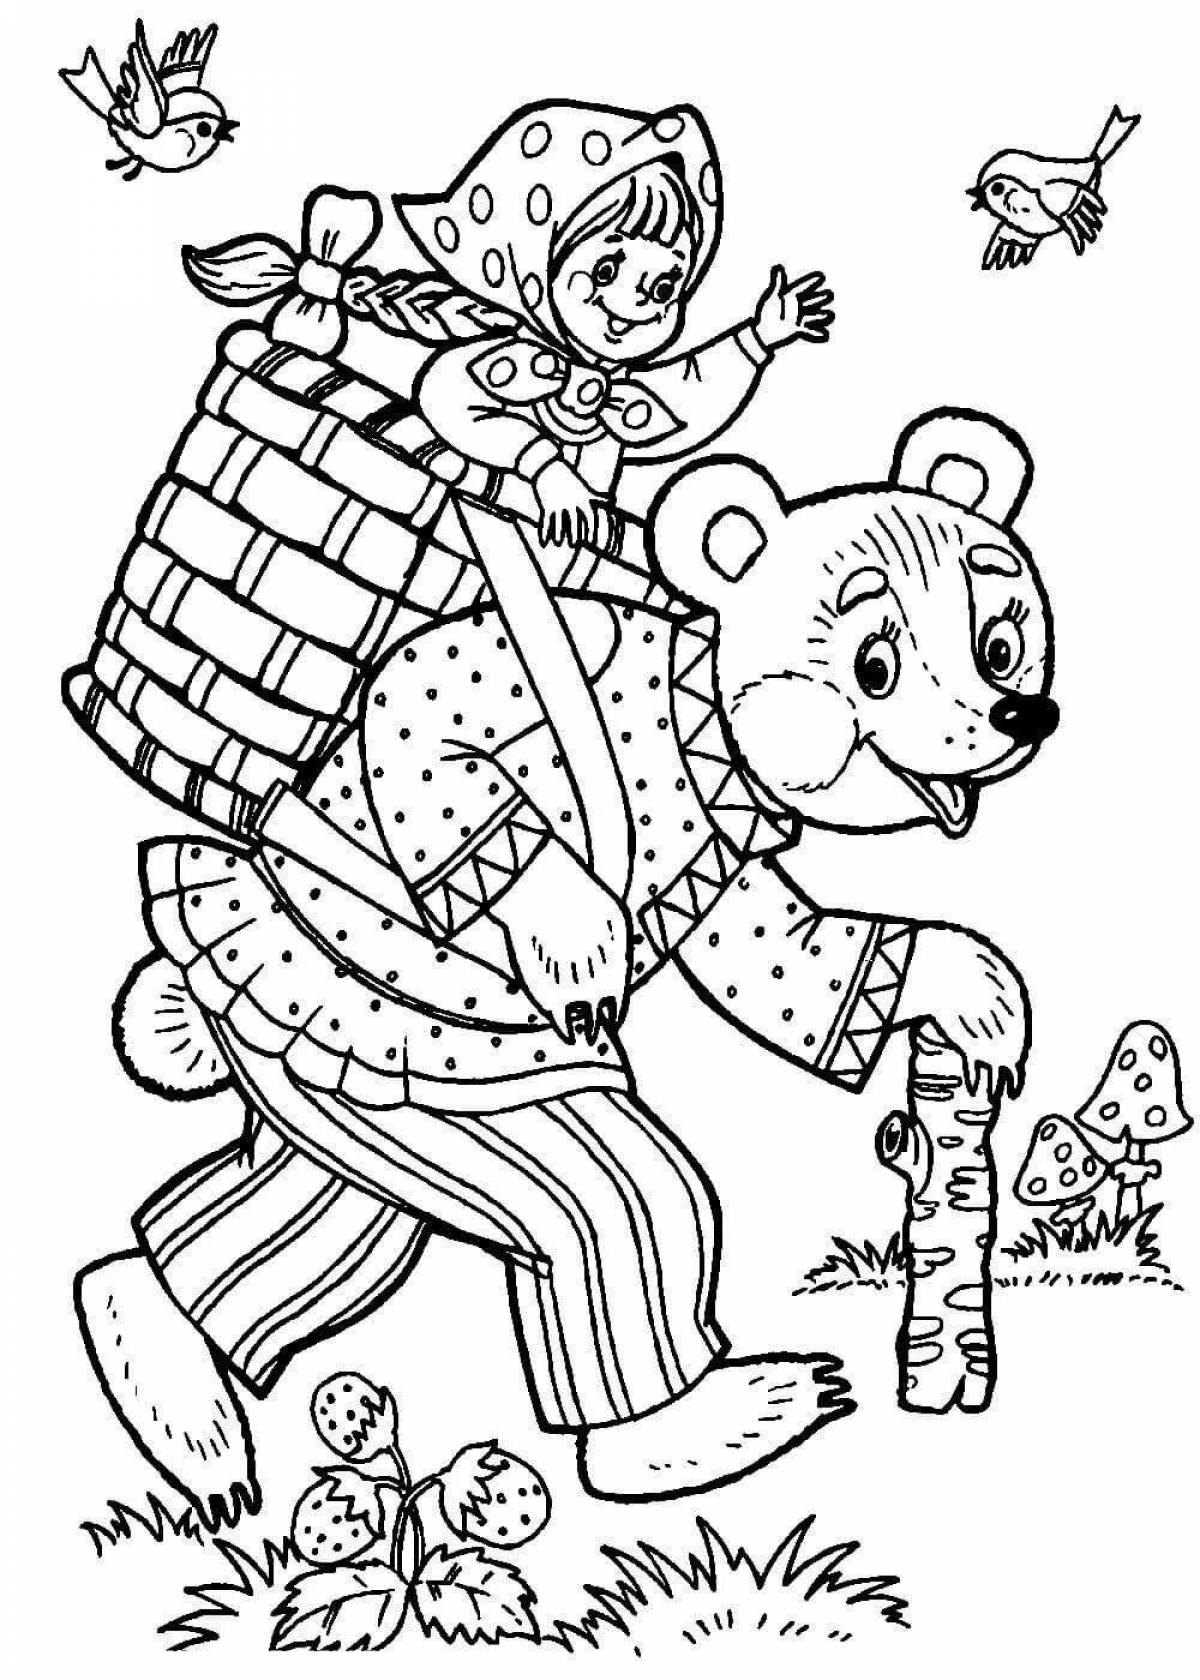 Adorable fairy tale character coloring book for toddlers